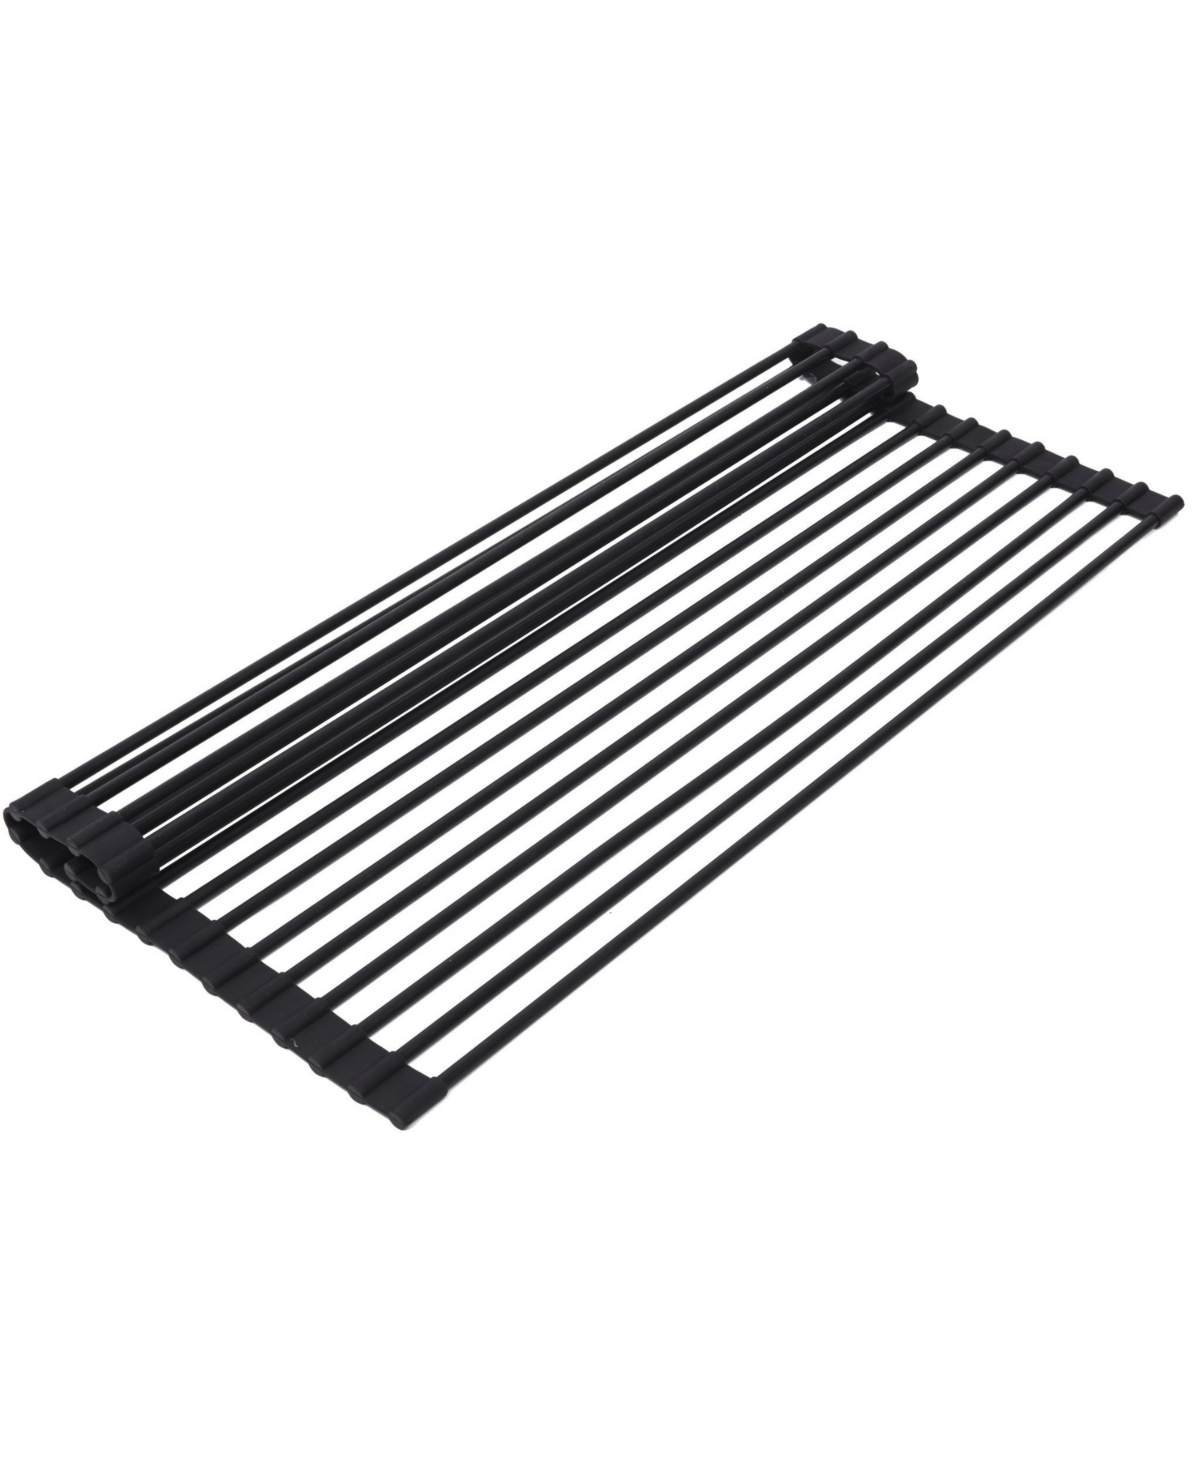 Dr-881 Over-The-Sink Roll-Up Drying Rack - Black